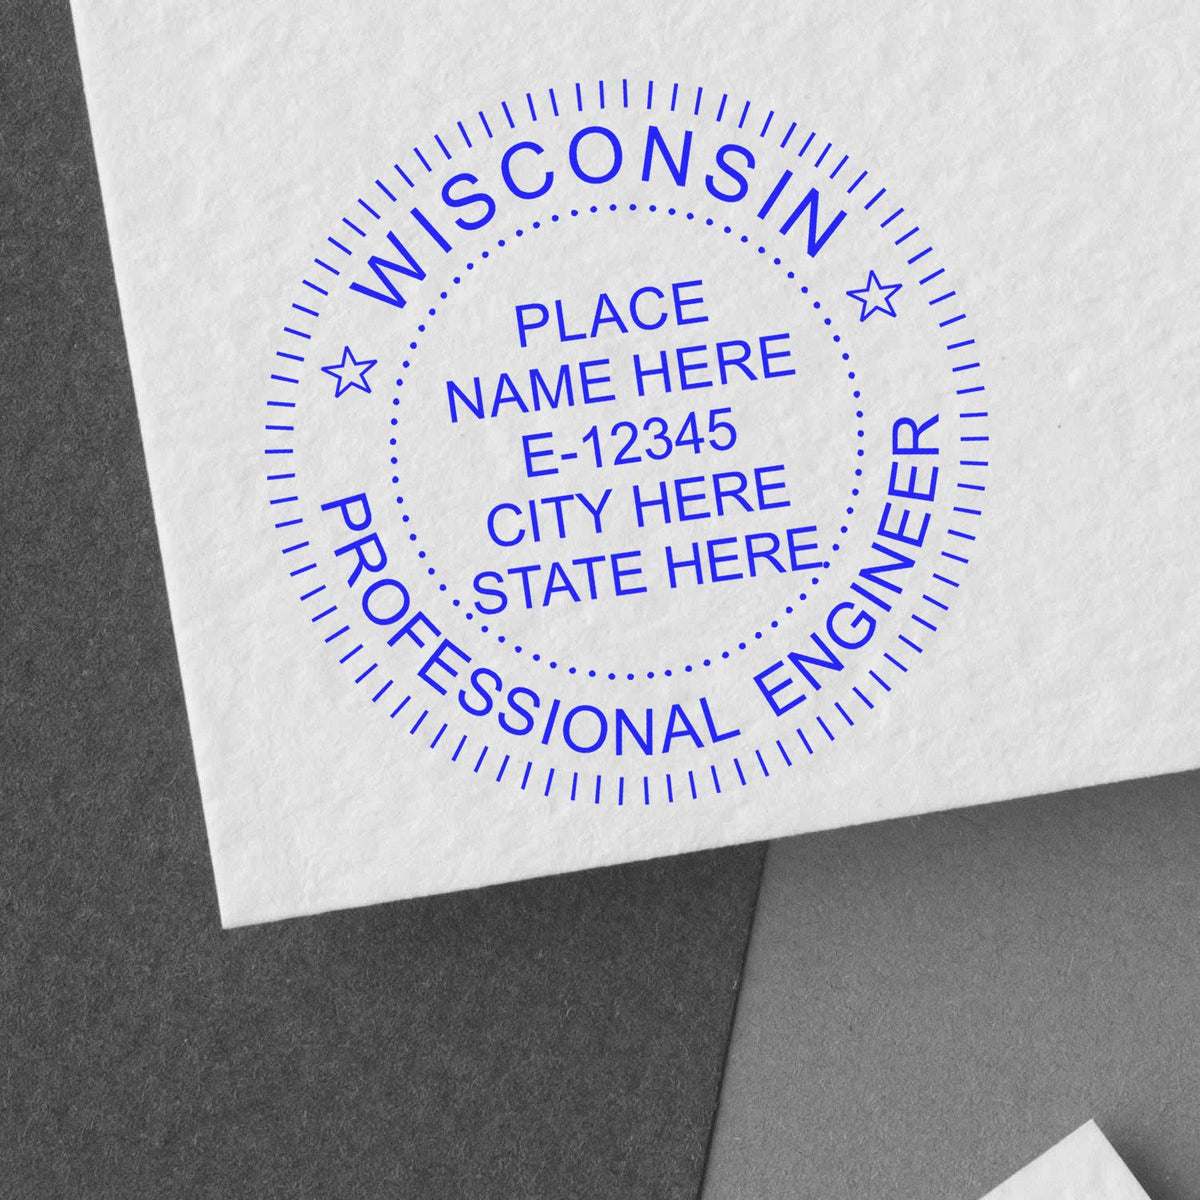 The Slim Pre-Inked Wisconsin Professional Engineer Seal Stamp stamp impression comes to life with a crisp, detailed photo on paper - showcasing true professional quality.